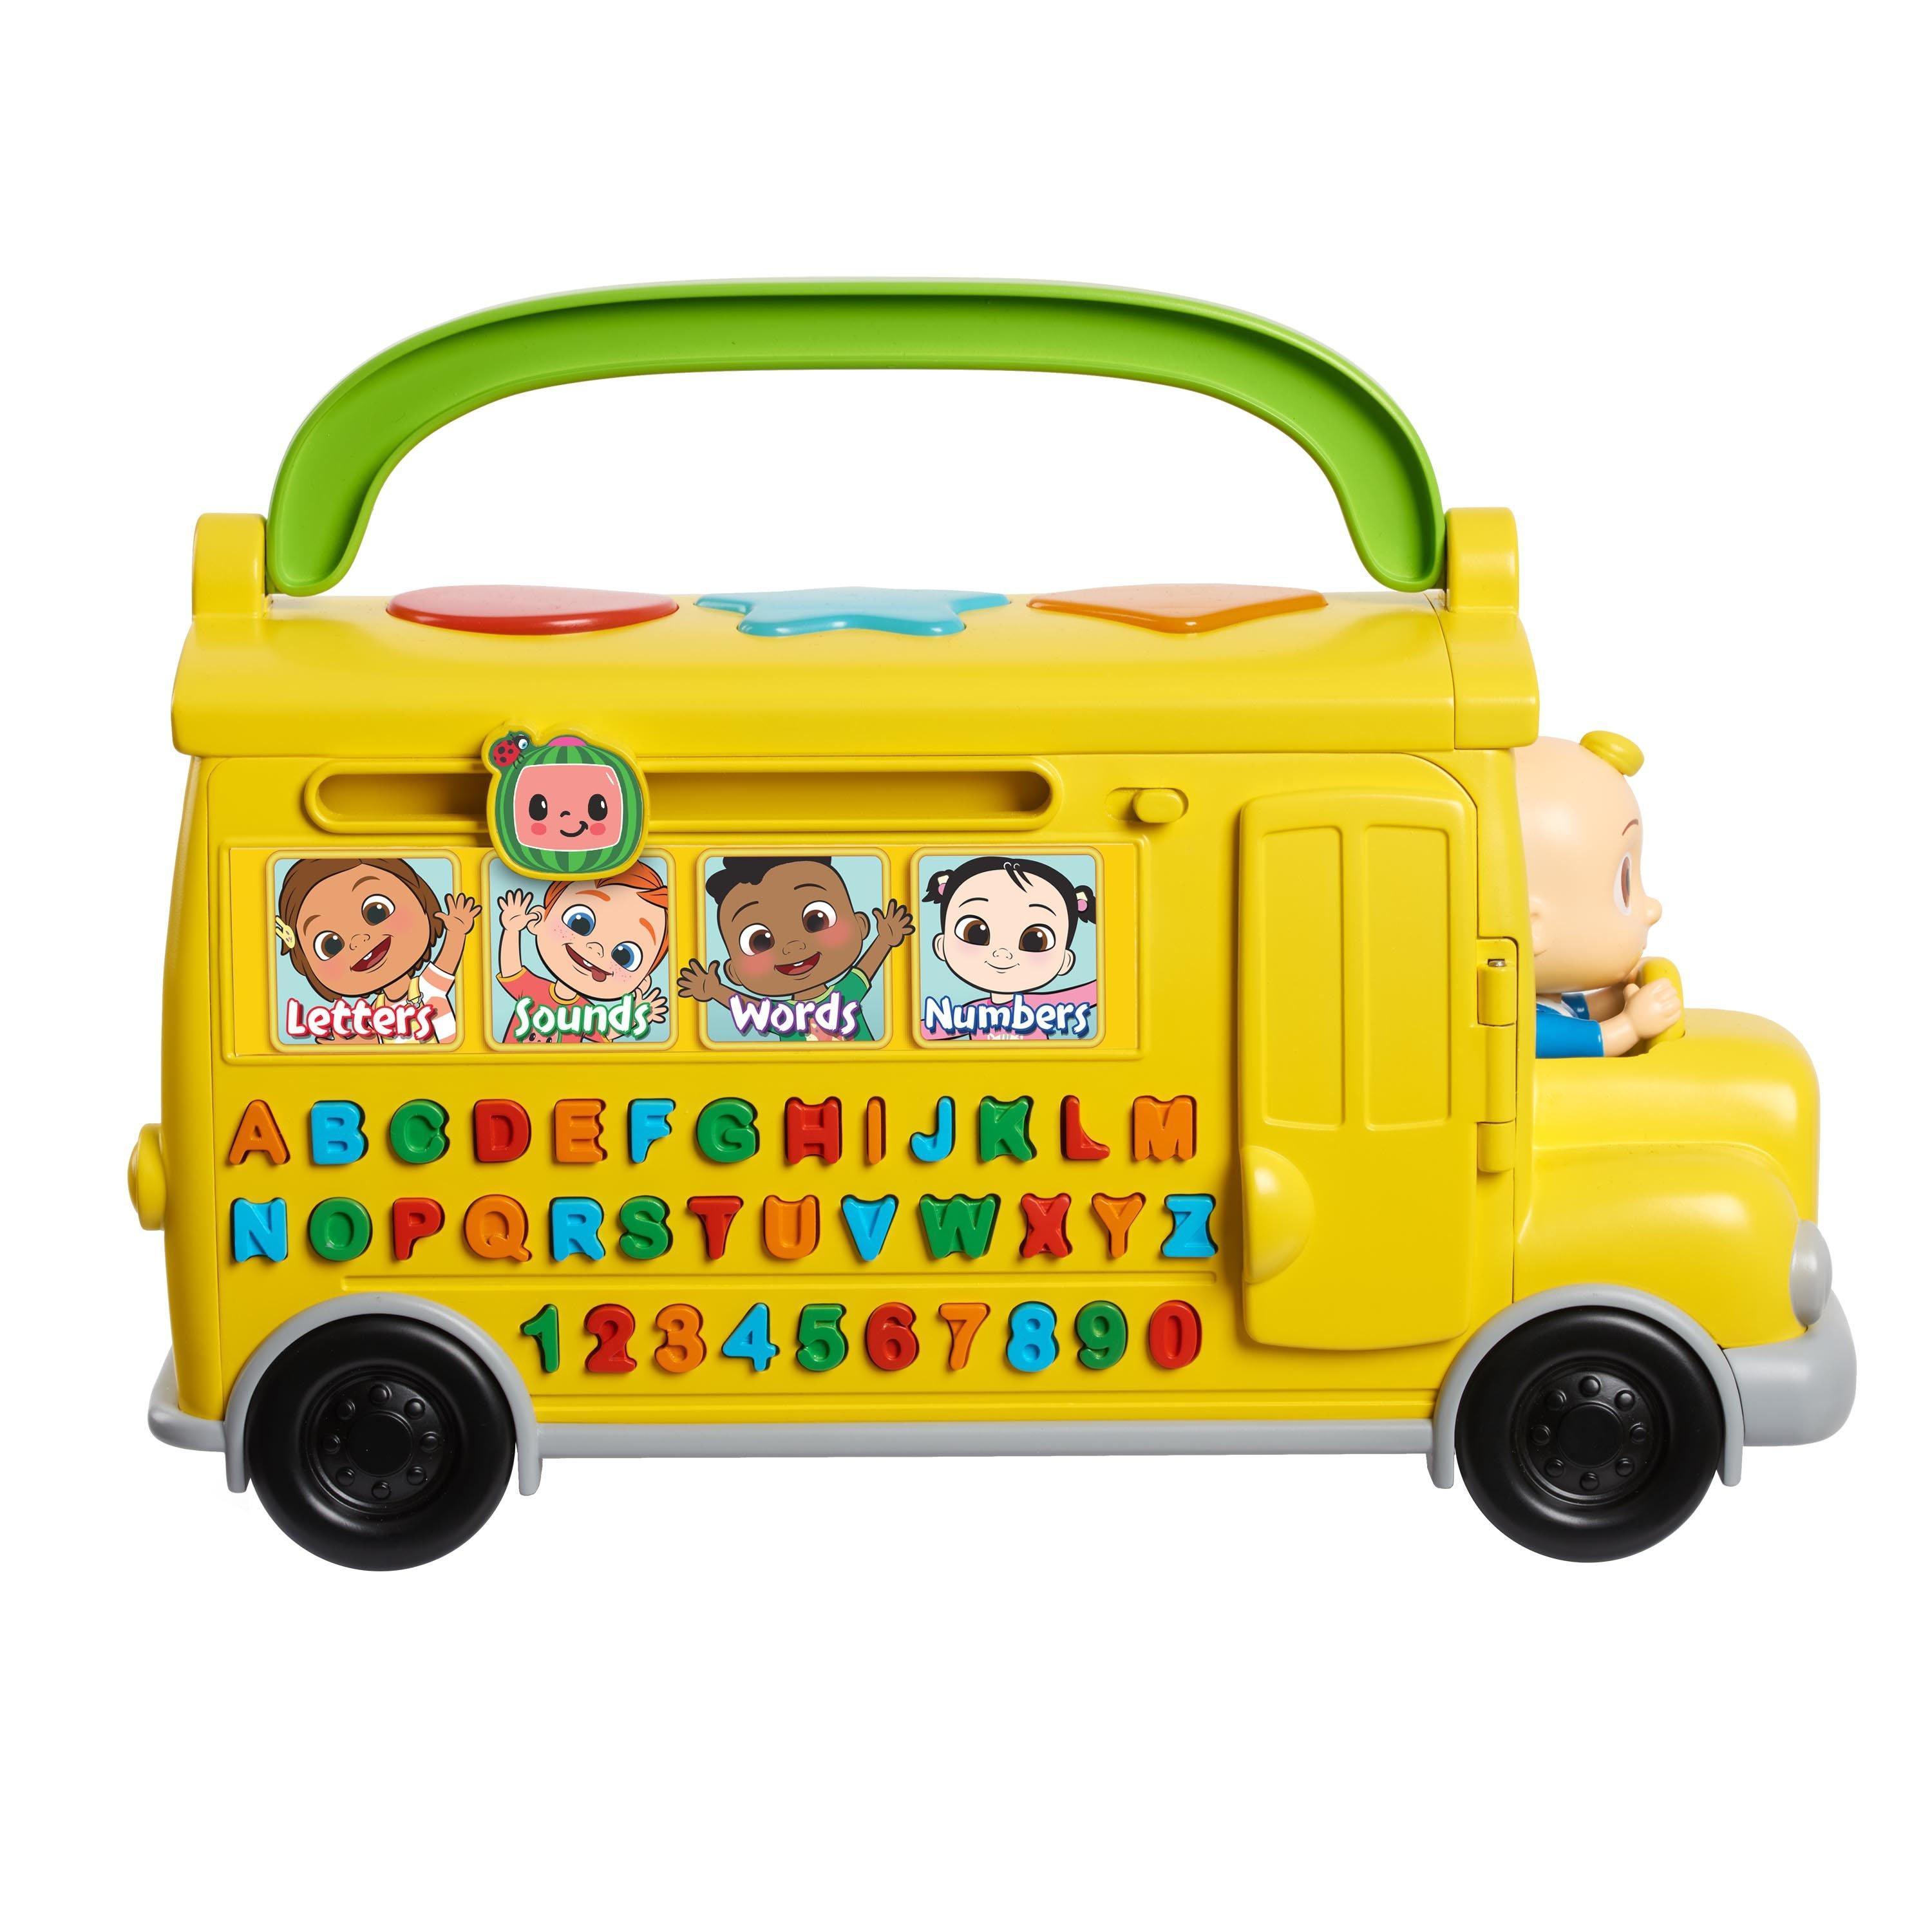 Preowned Alphabet School Bus Interactive Learning Tool for Young Children 